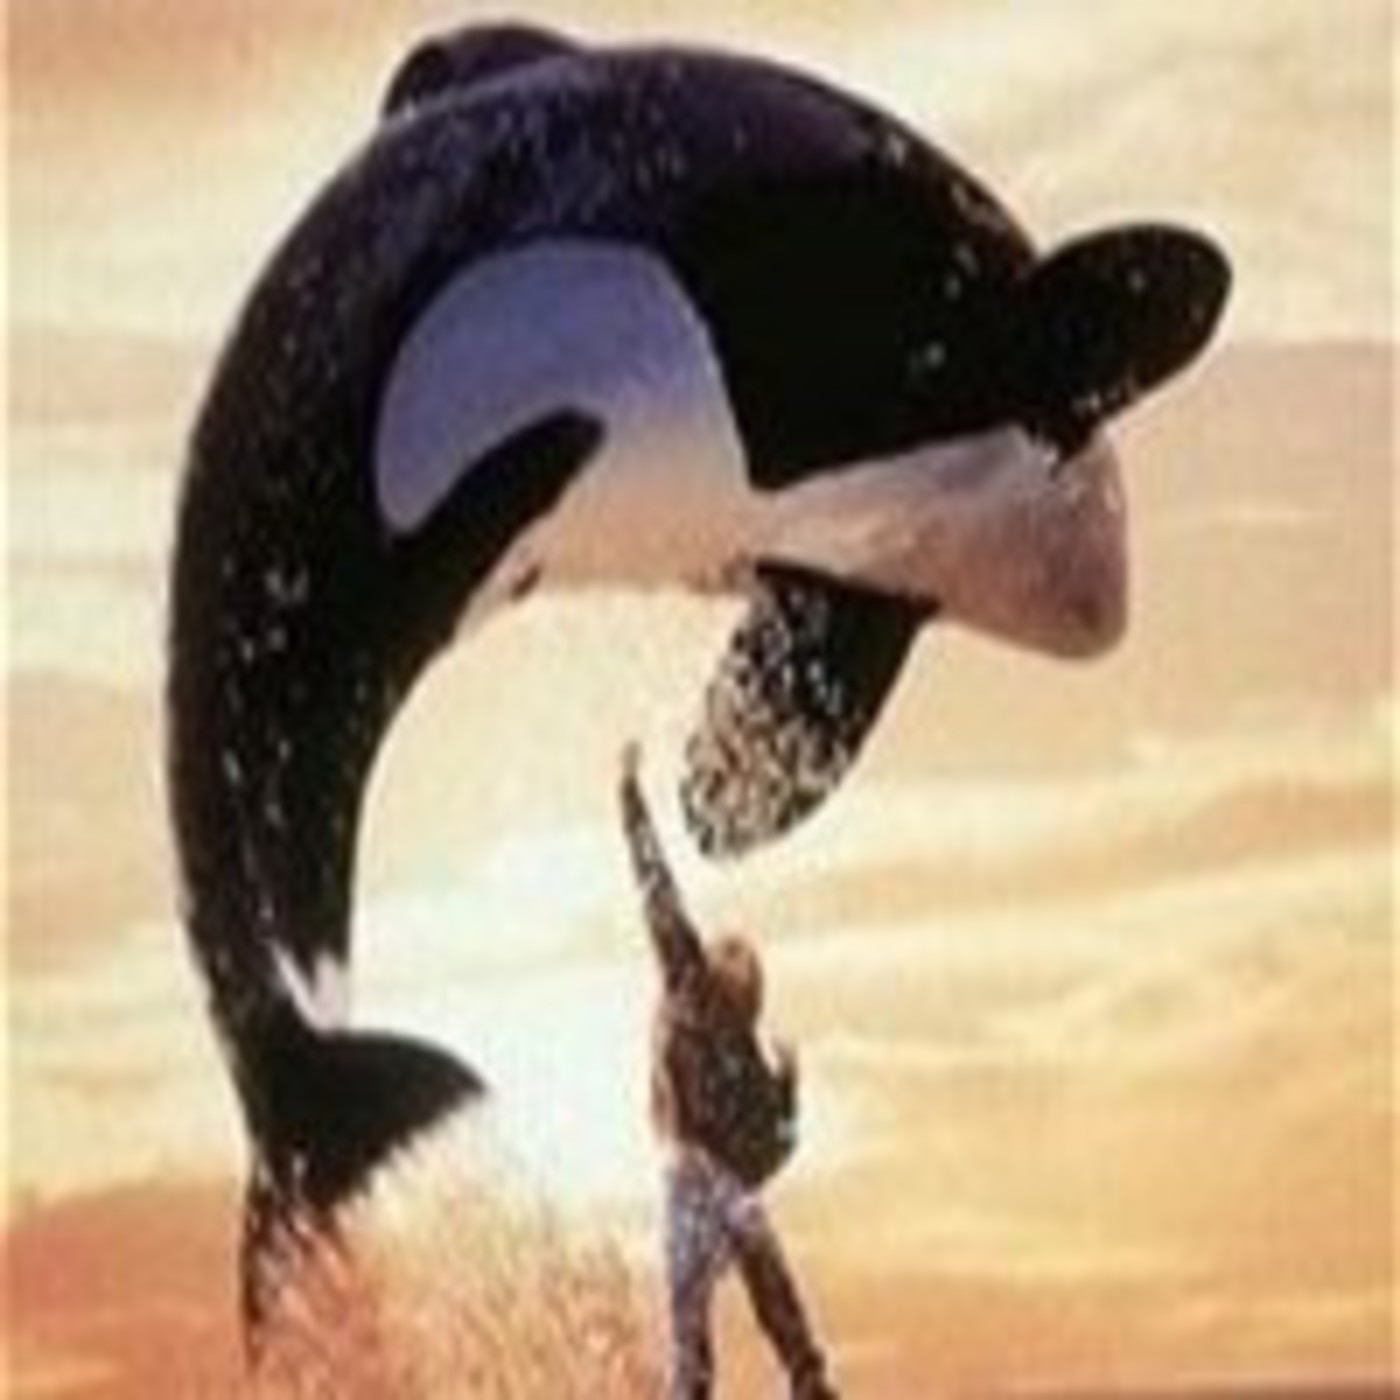 michael jackson free willy 2